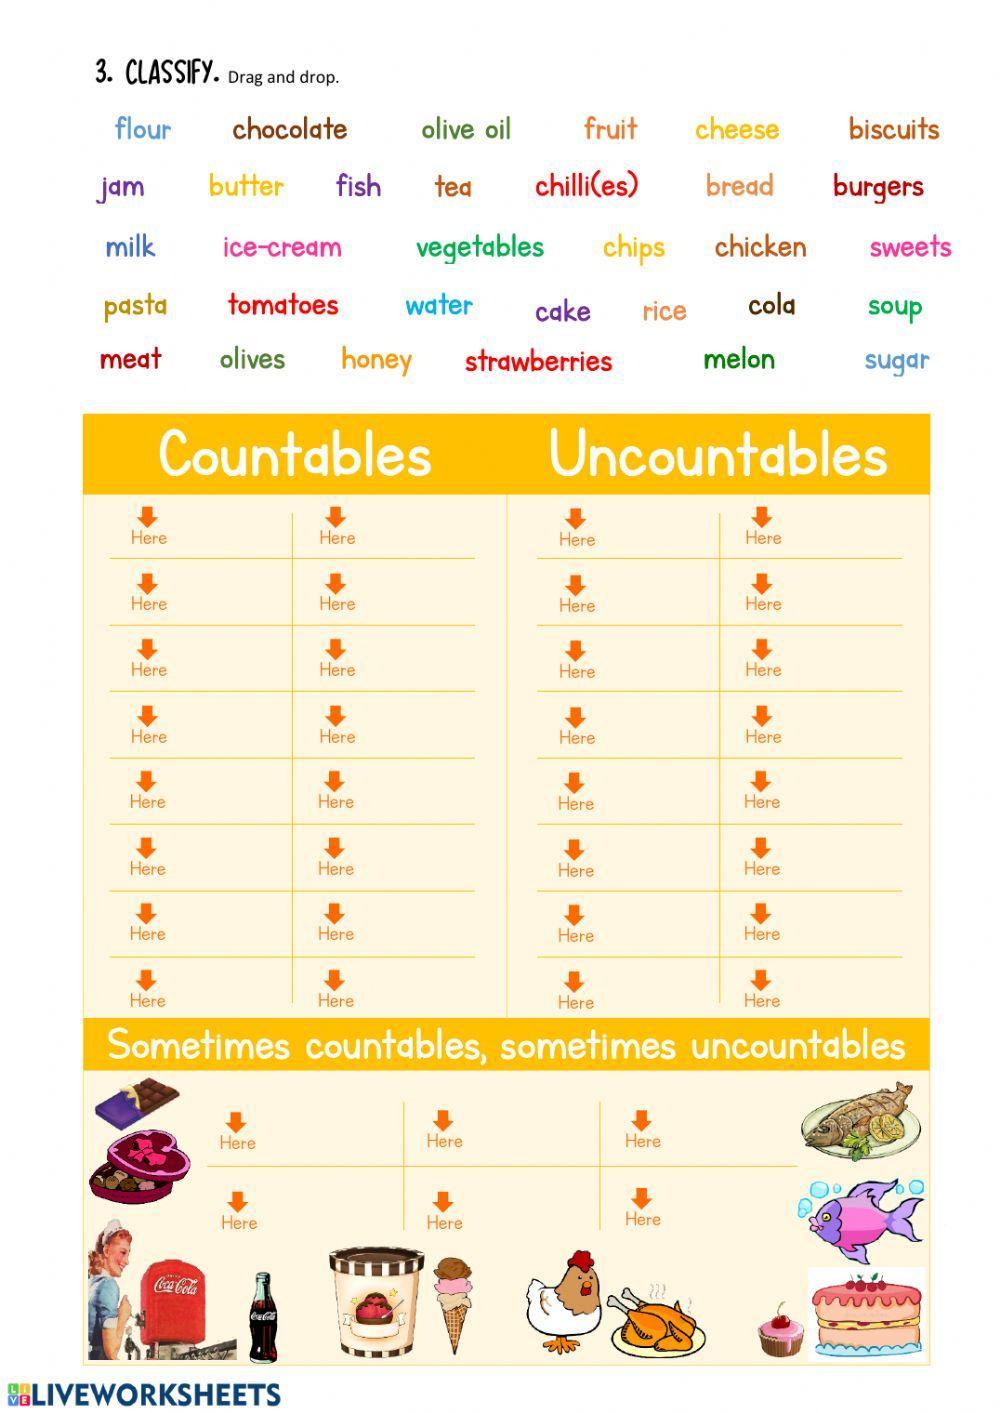 Countables or uncountables?